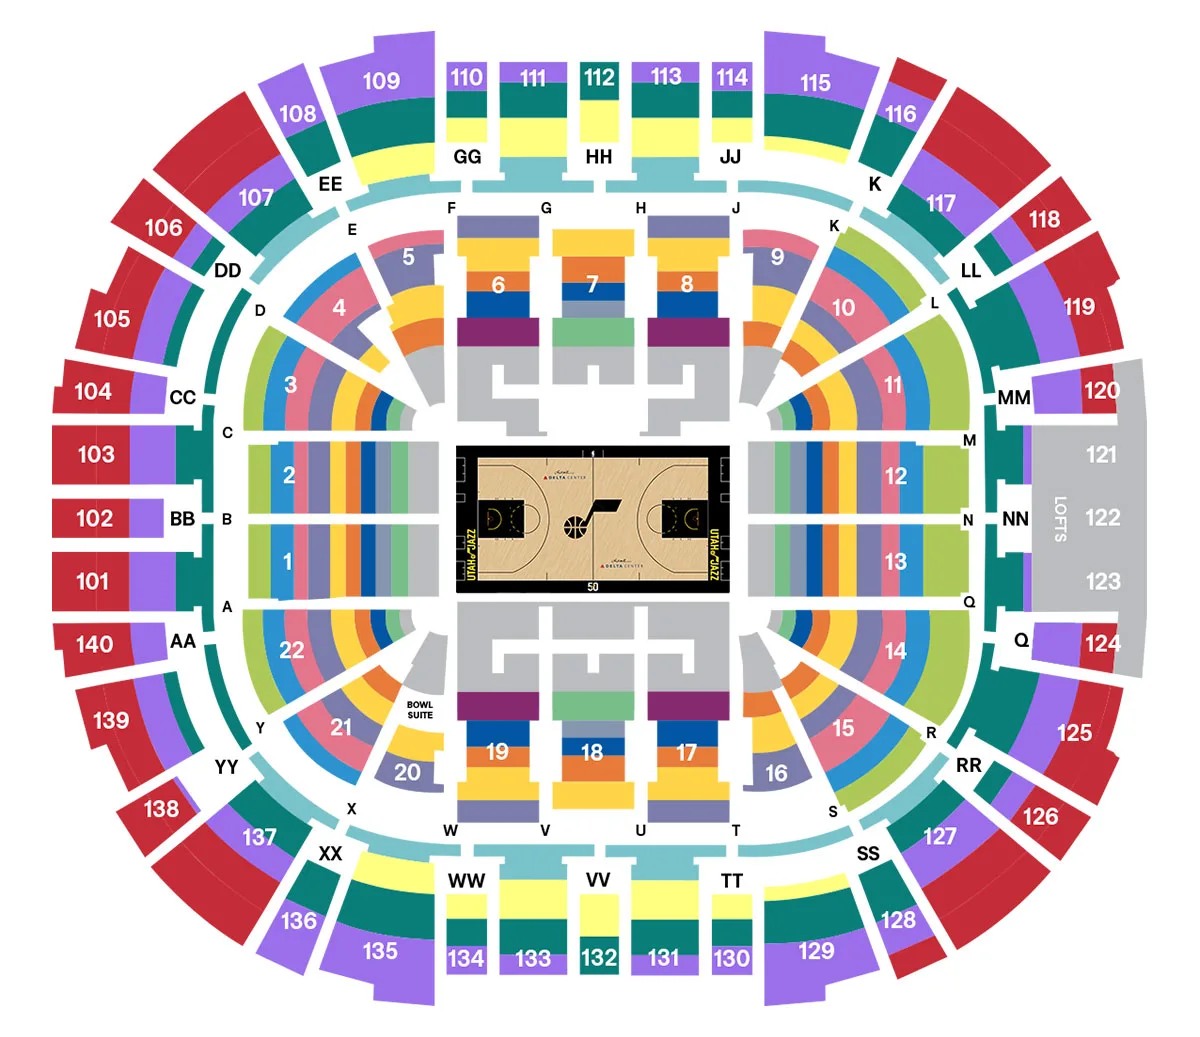 Seating map of Utah Jazz game, divided by sections